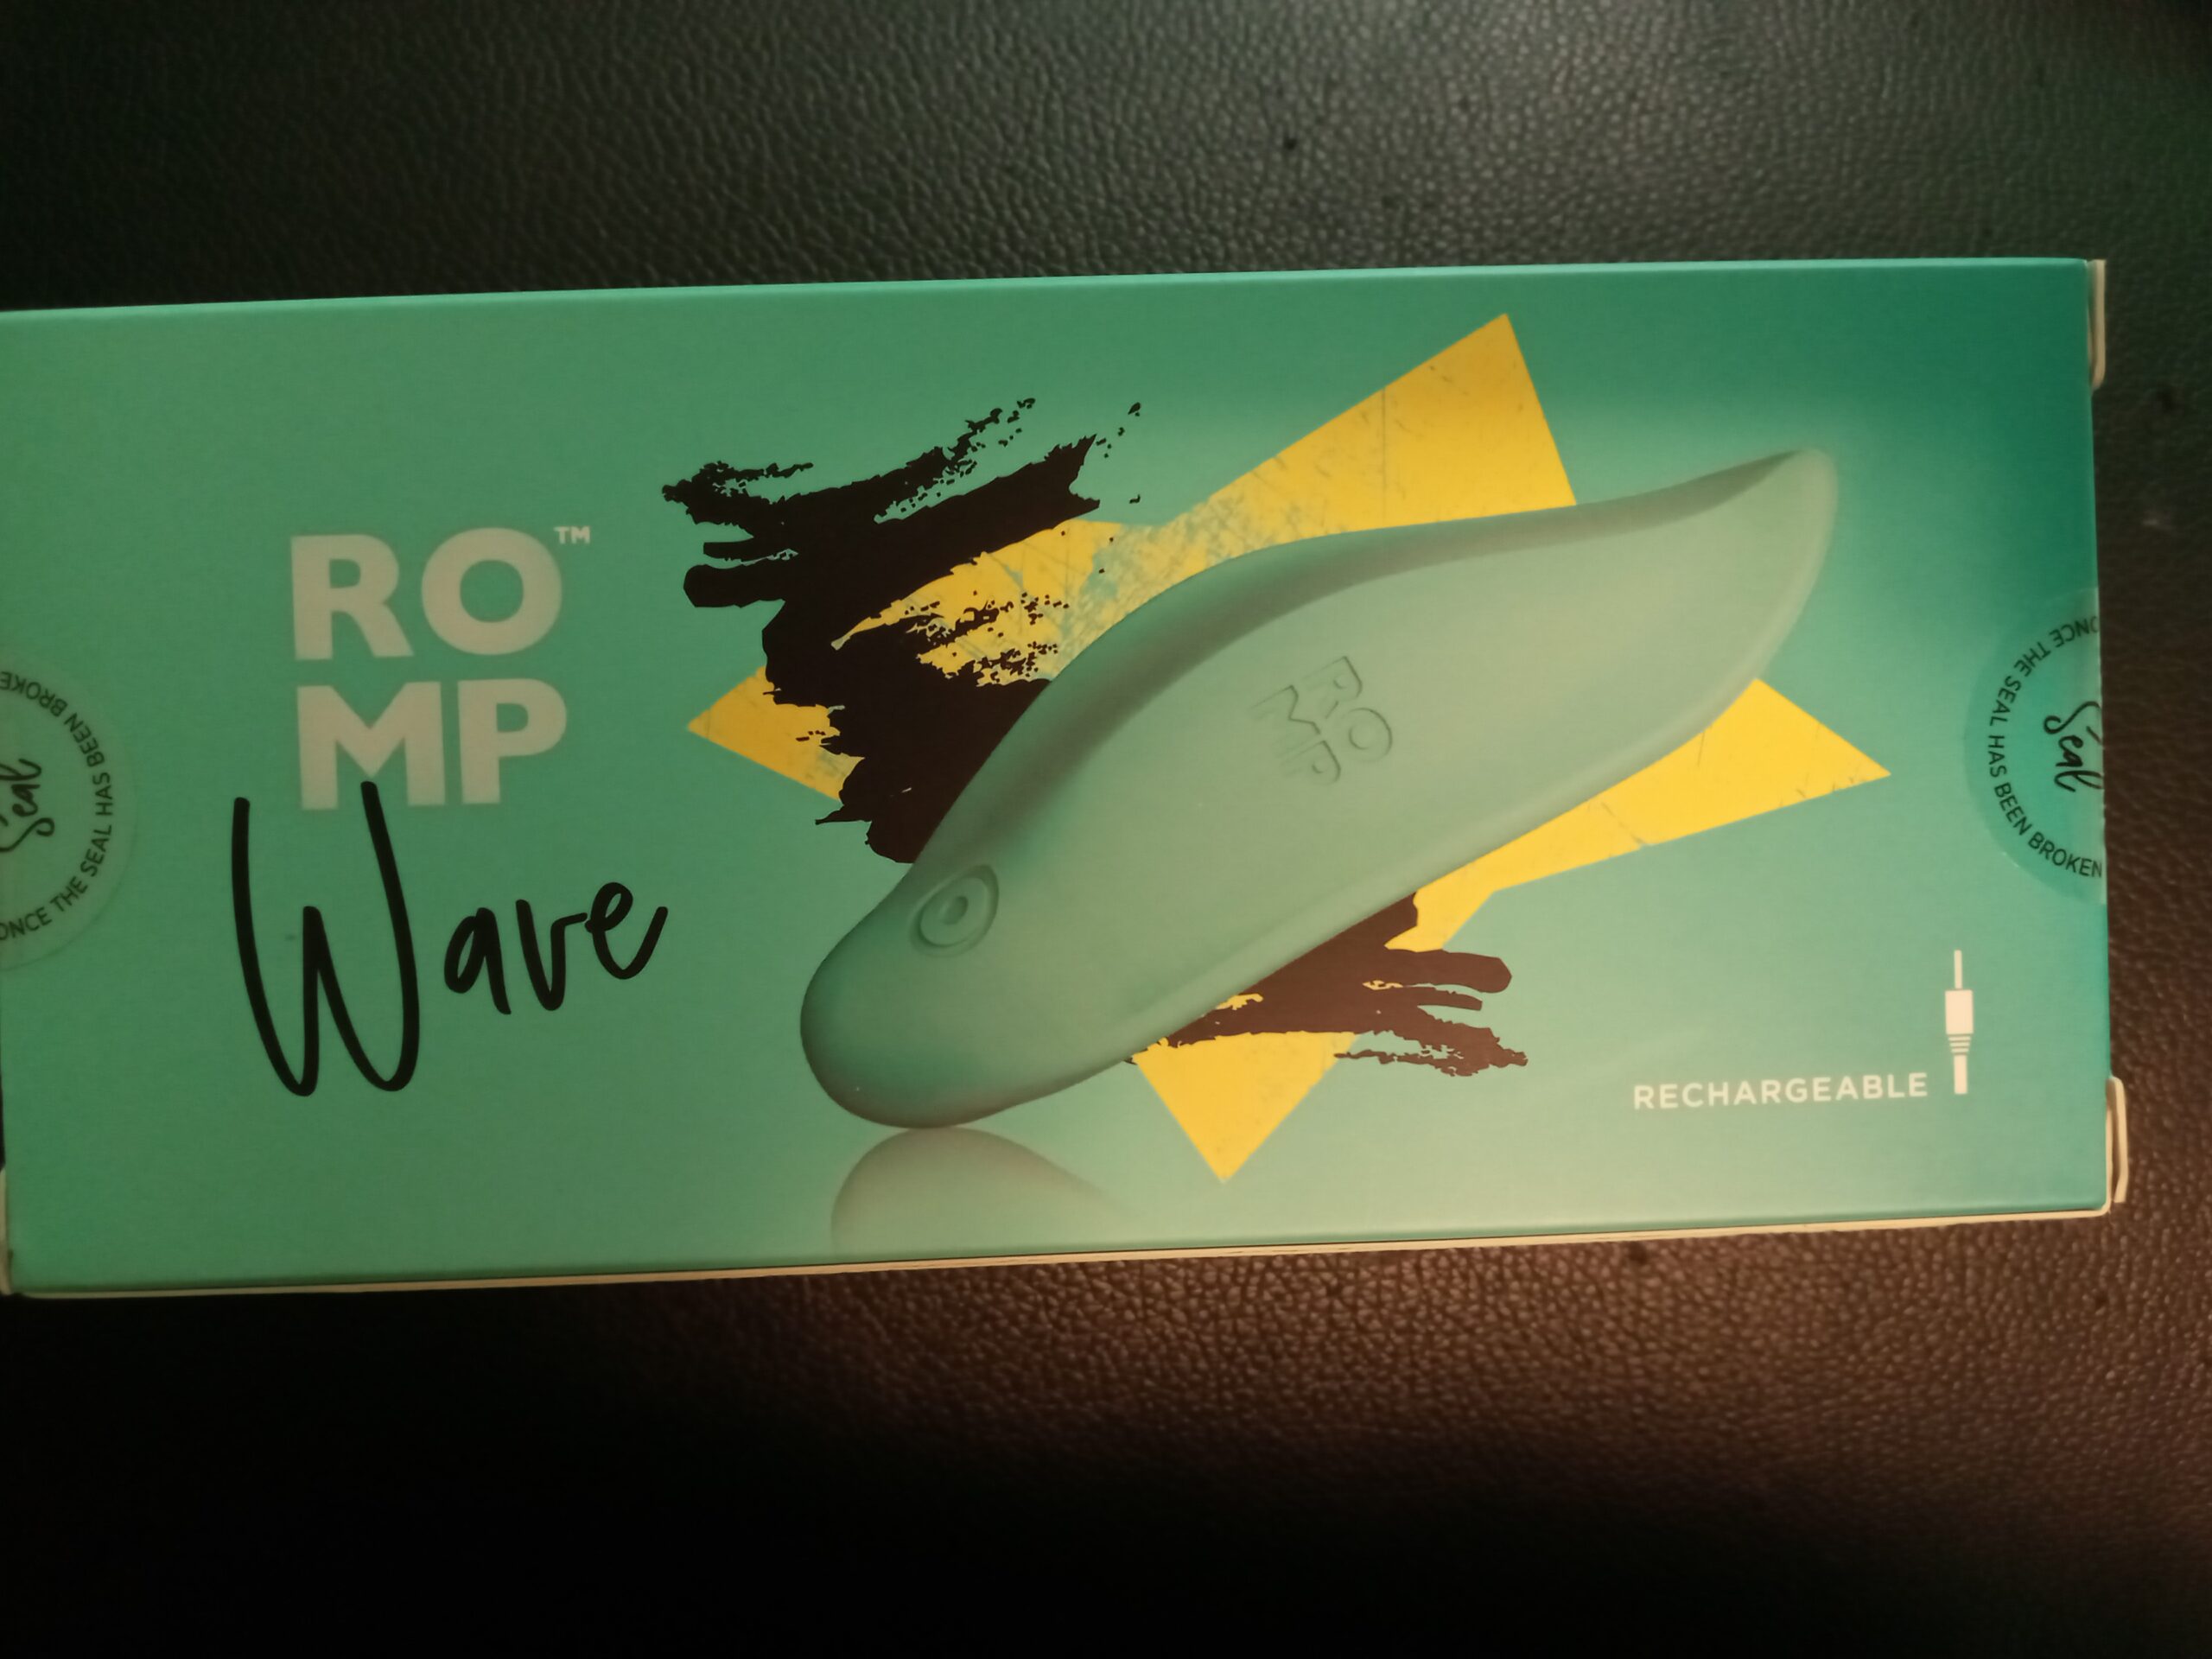 ROMP Wave Materials and care